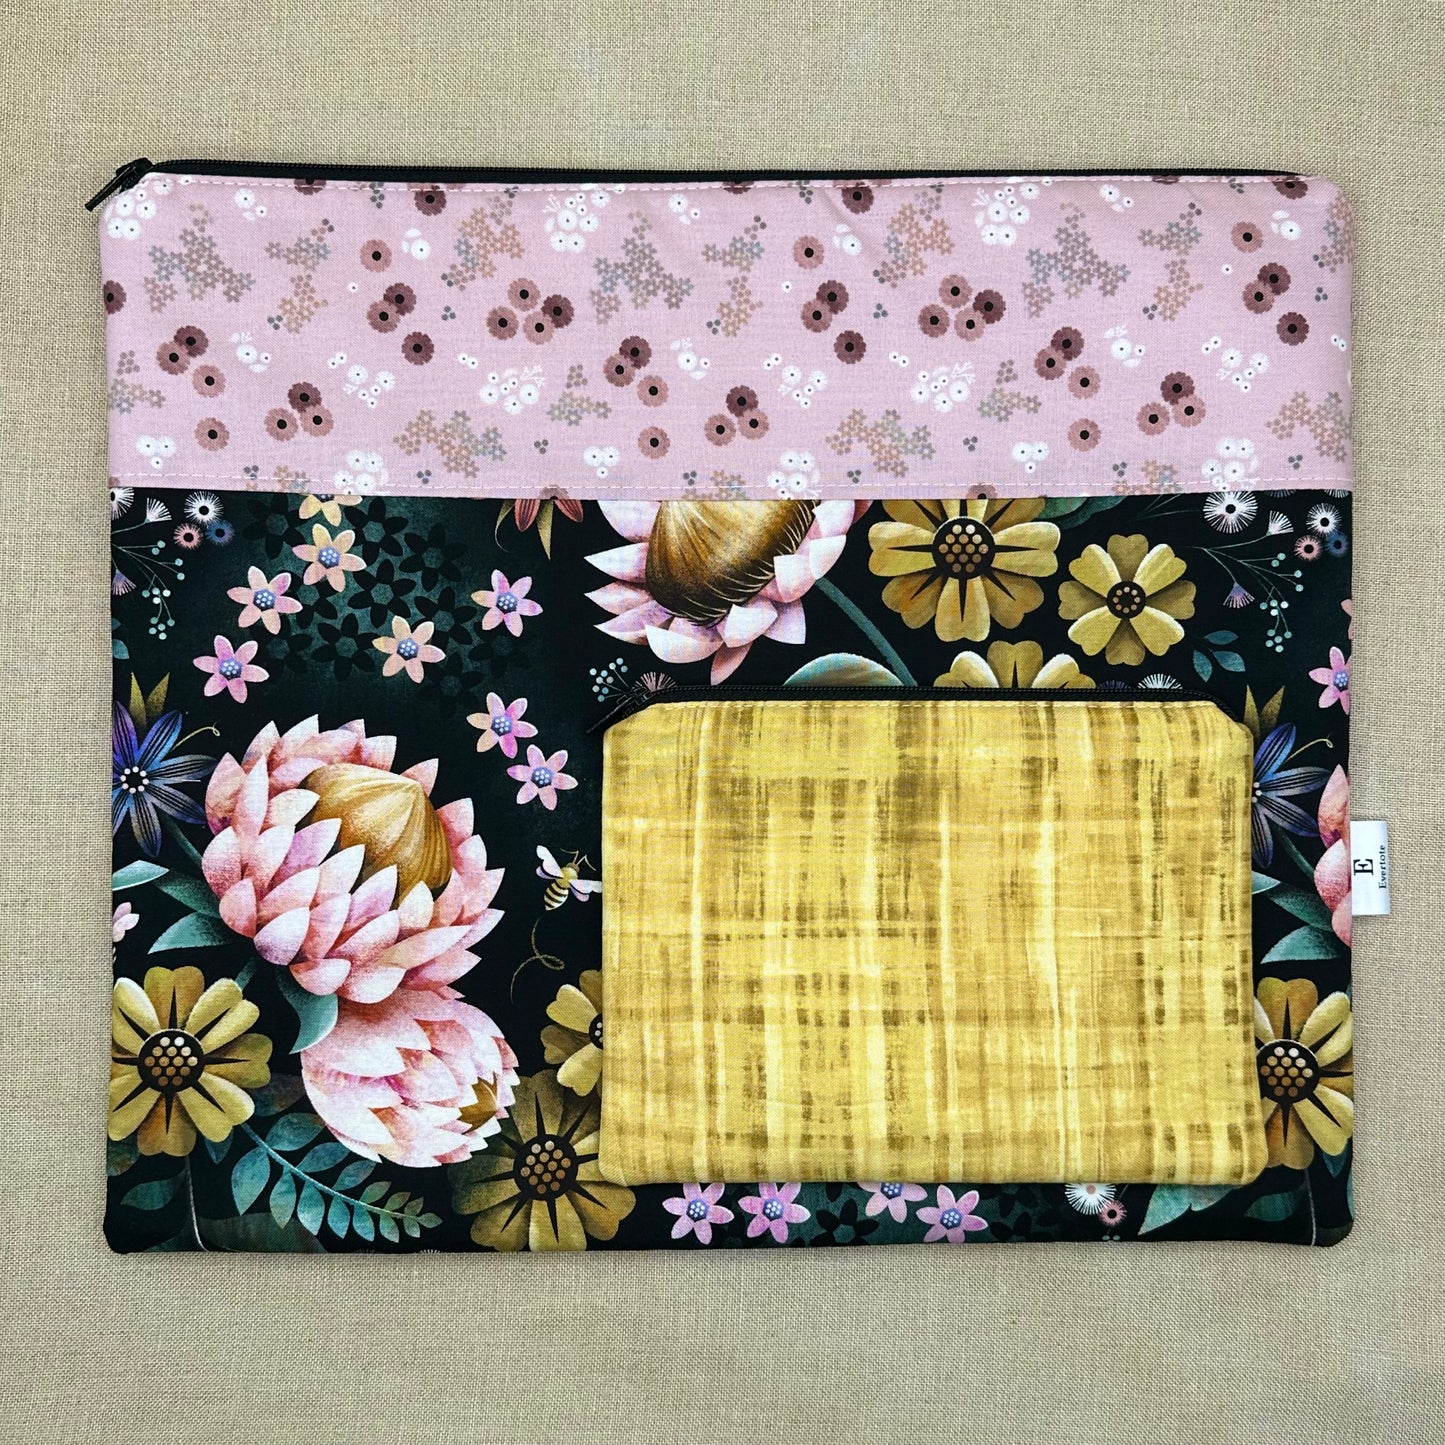 Bloom Service - Project Bag with Coordinating Notions Pouch